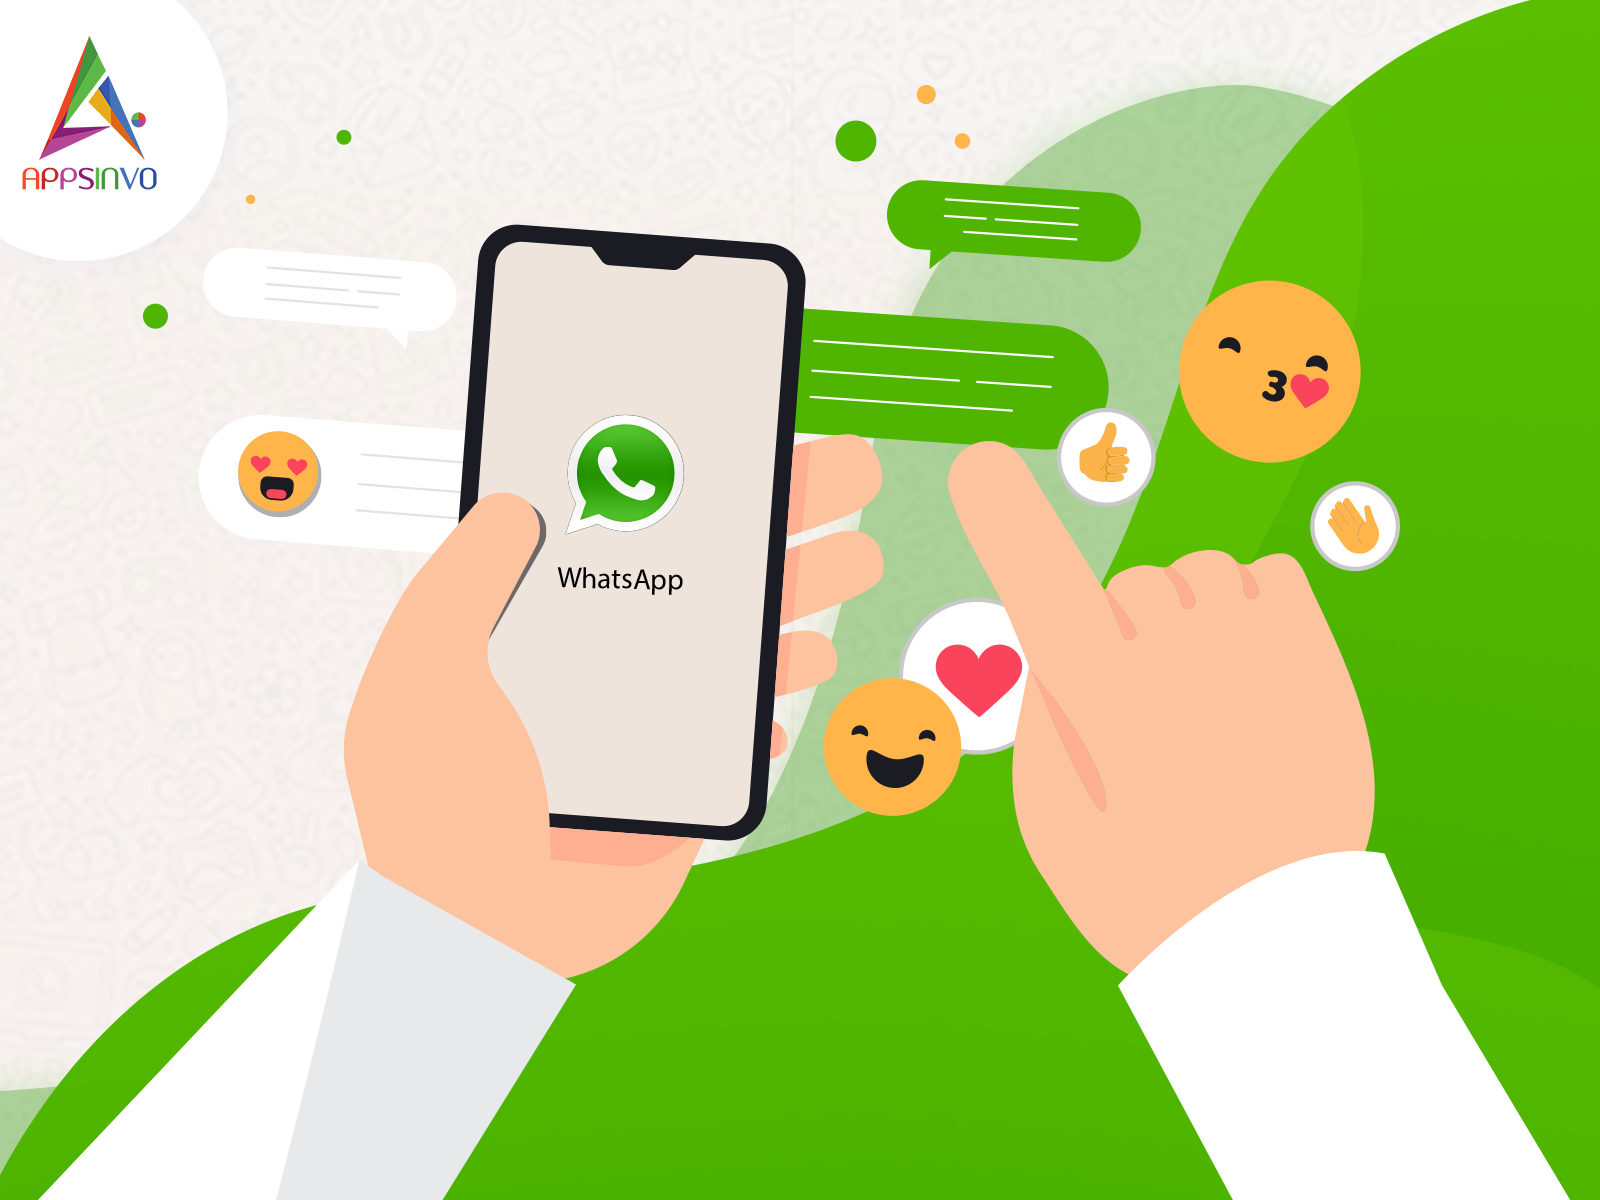 Whatsapp New Self-destructing Feature for Messages by Appsinvo on Dribbble